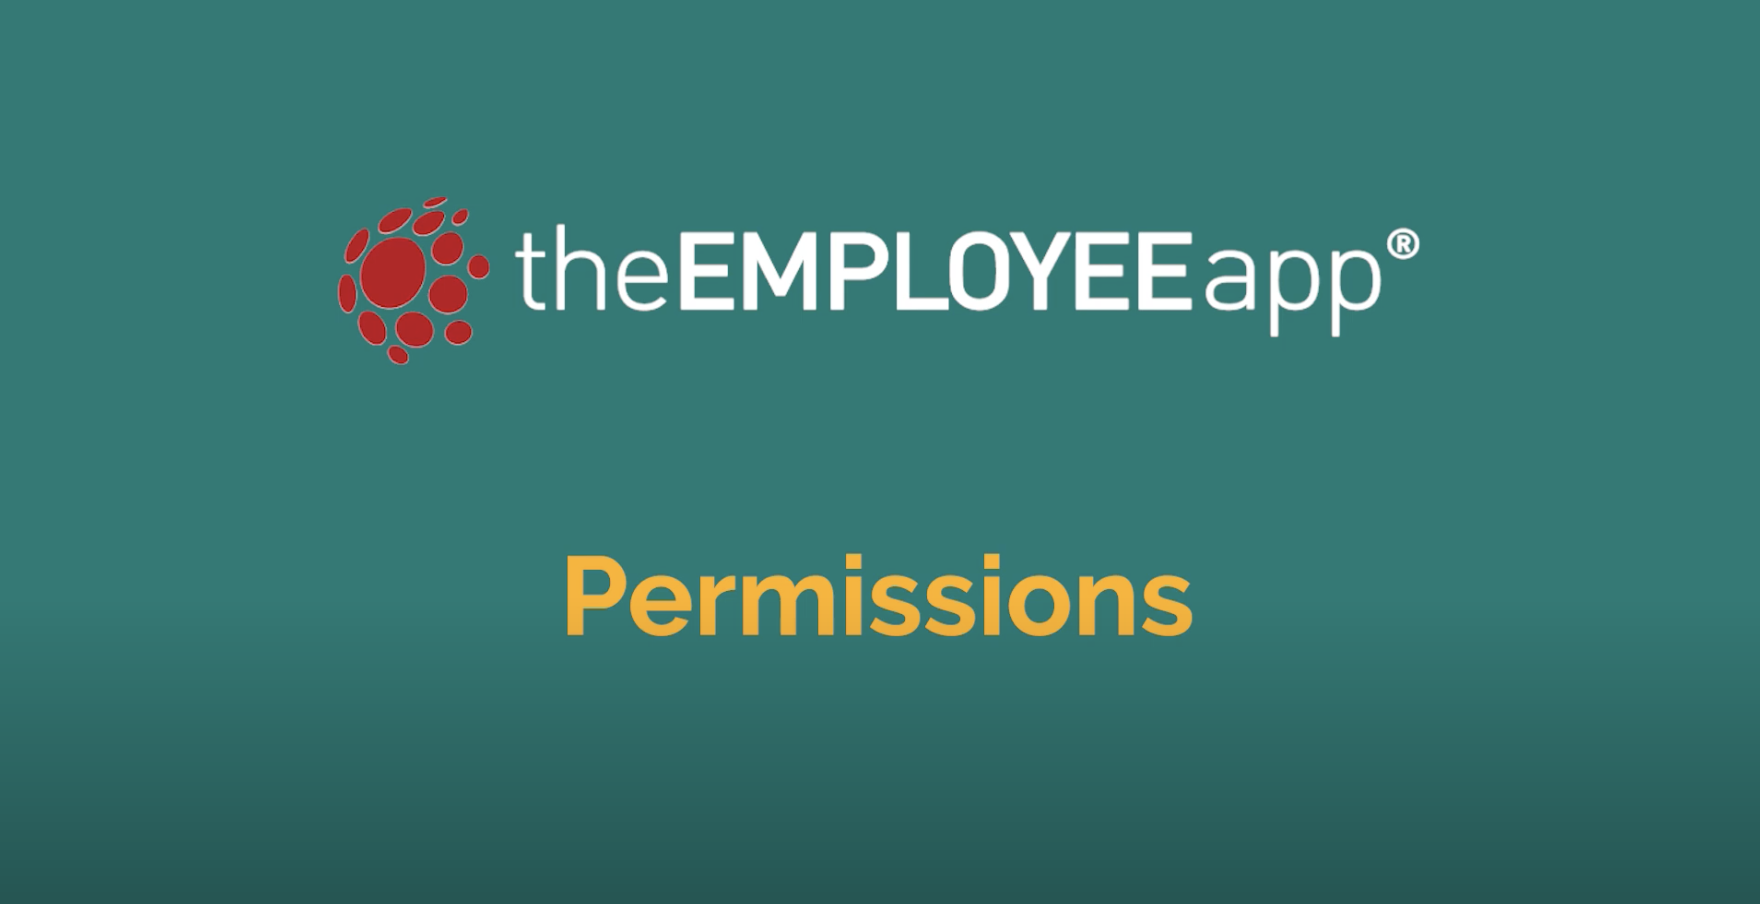 theEMPLOYEEapp permissions